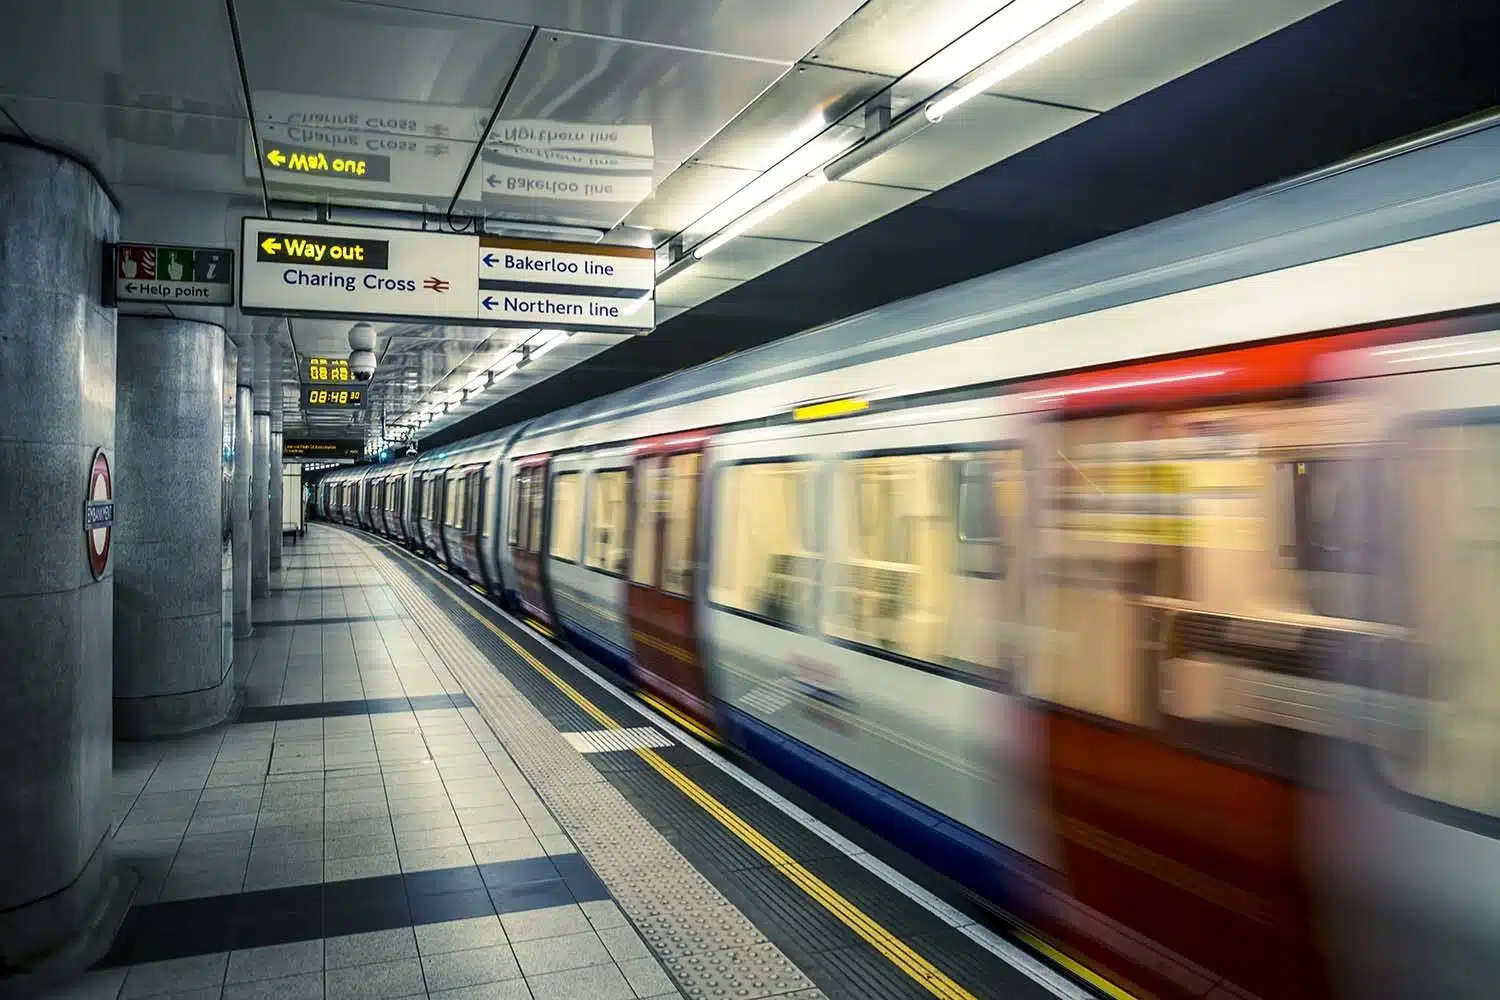 Facts about the London Underground